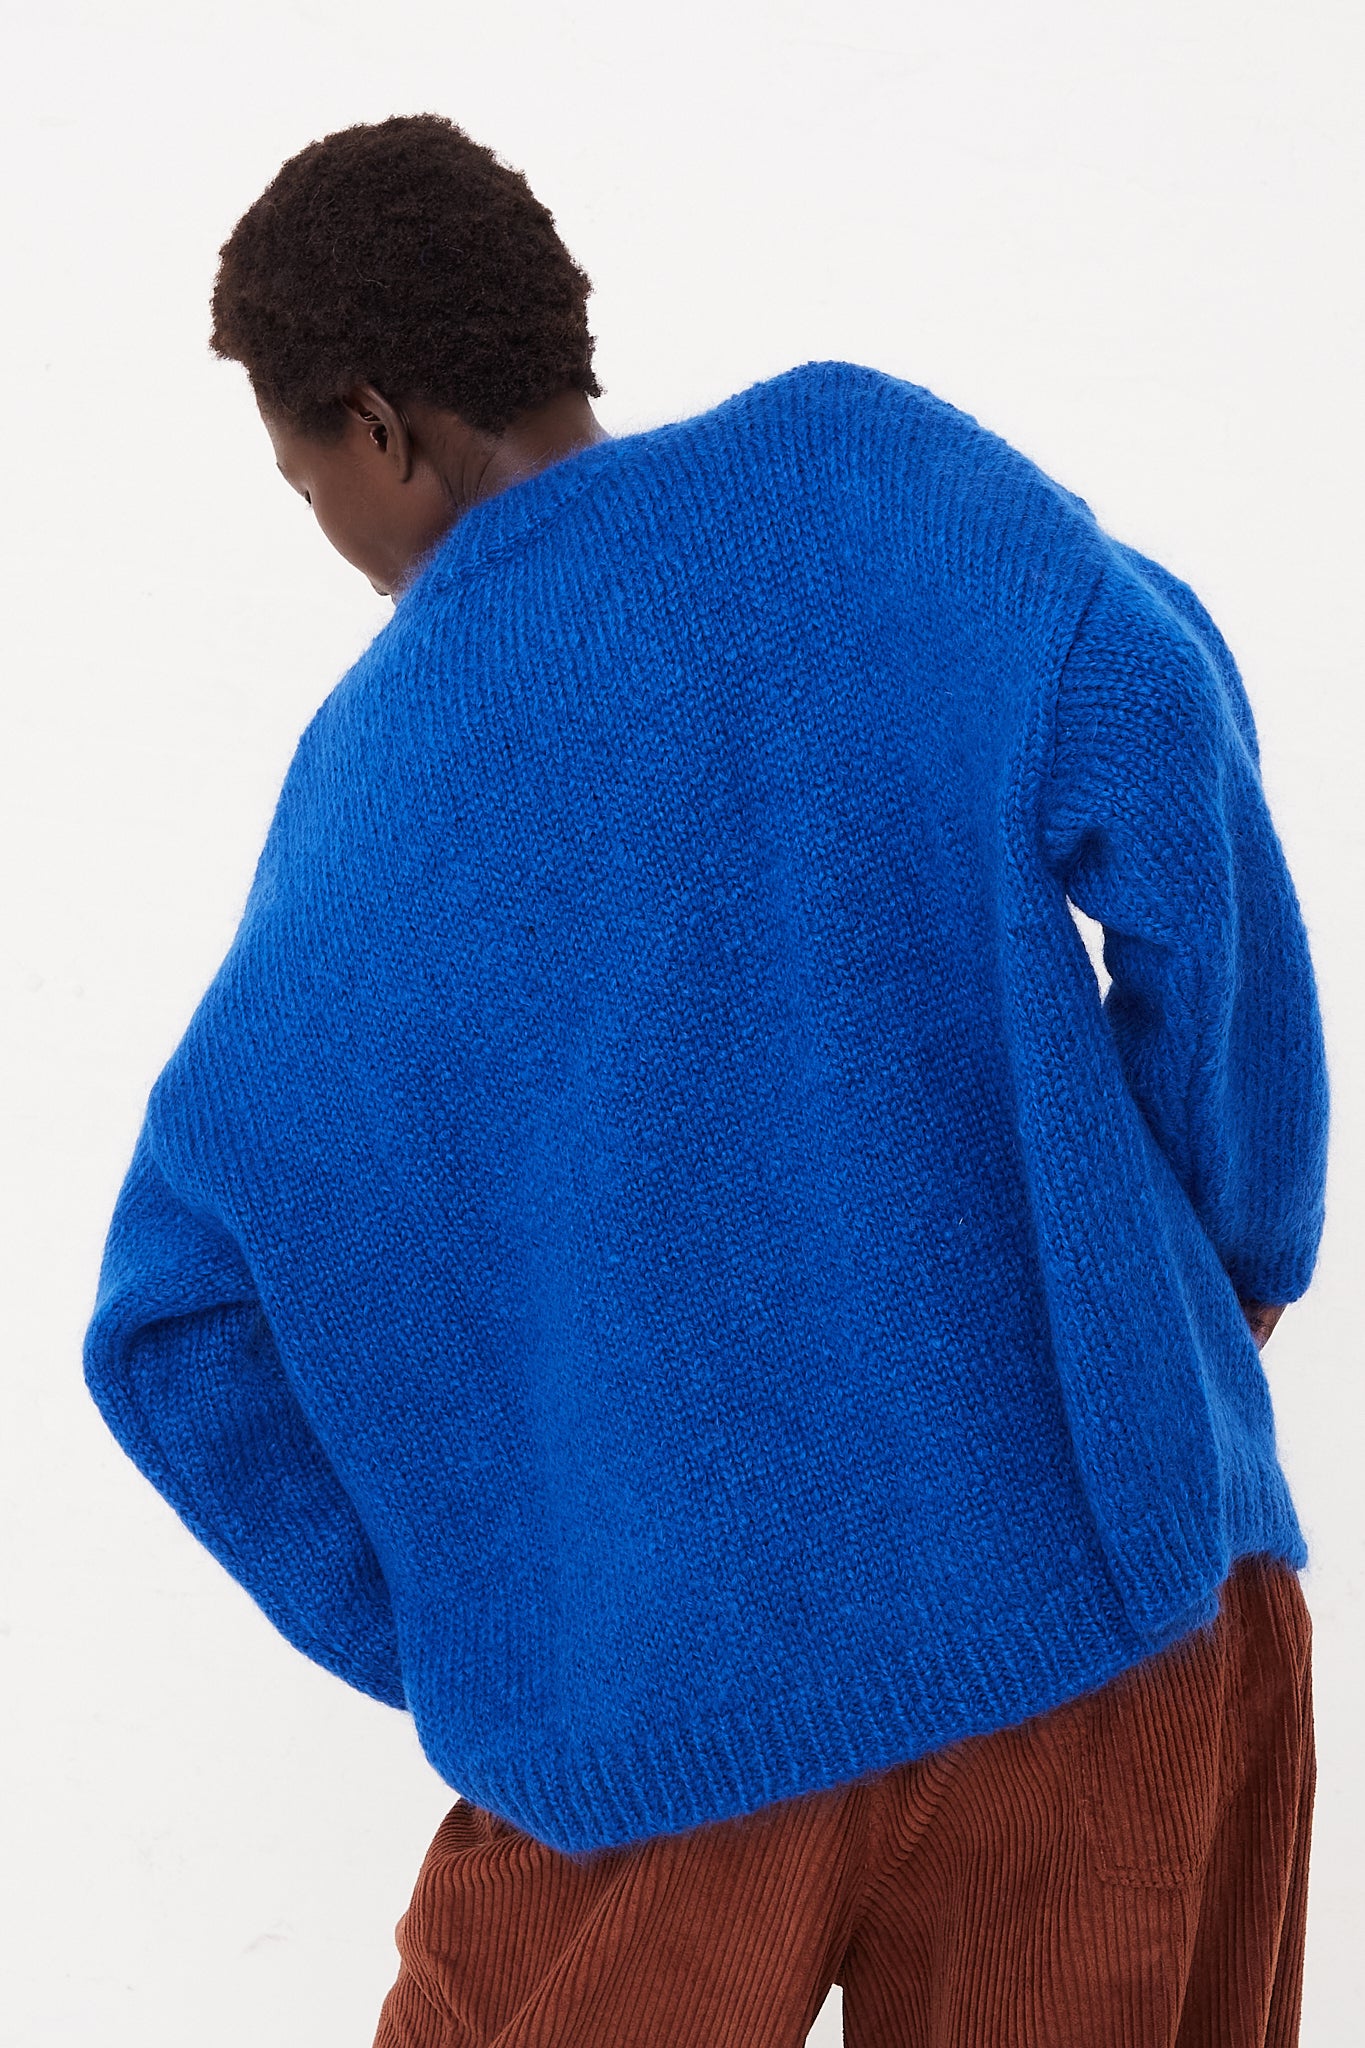 CORDERA Mohair Sweater in Blue | Oroboro Store | Back view of sweater upclose on model